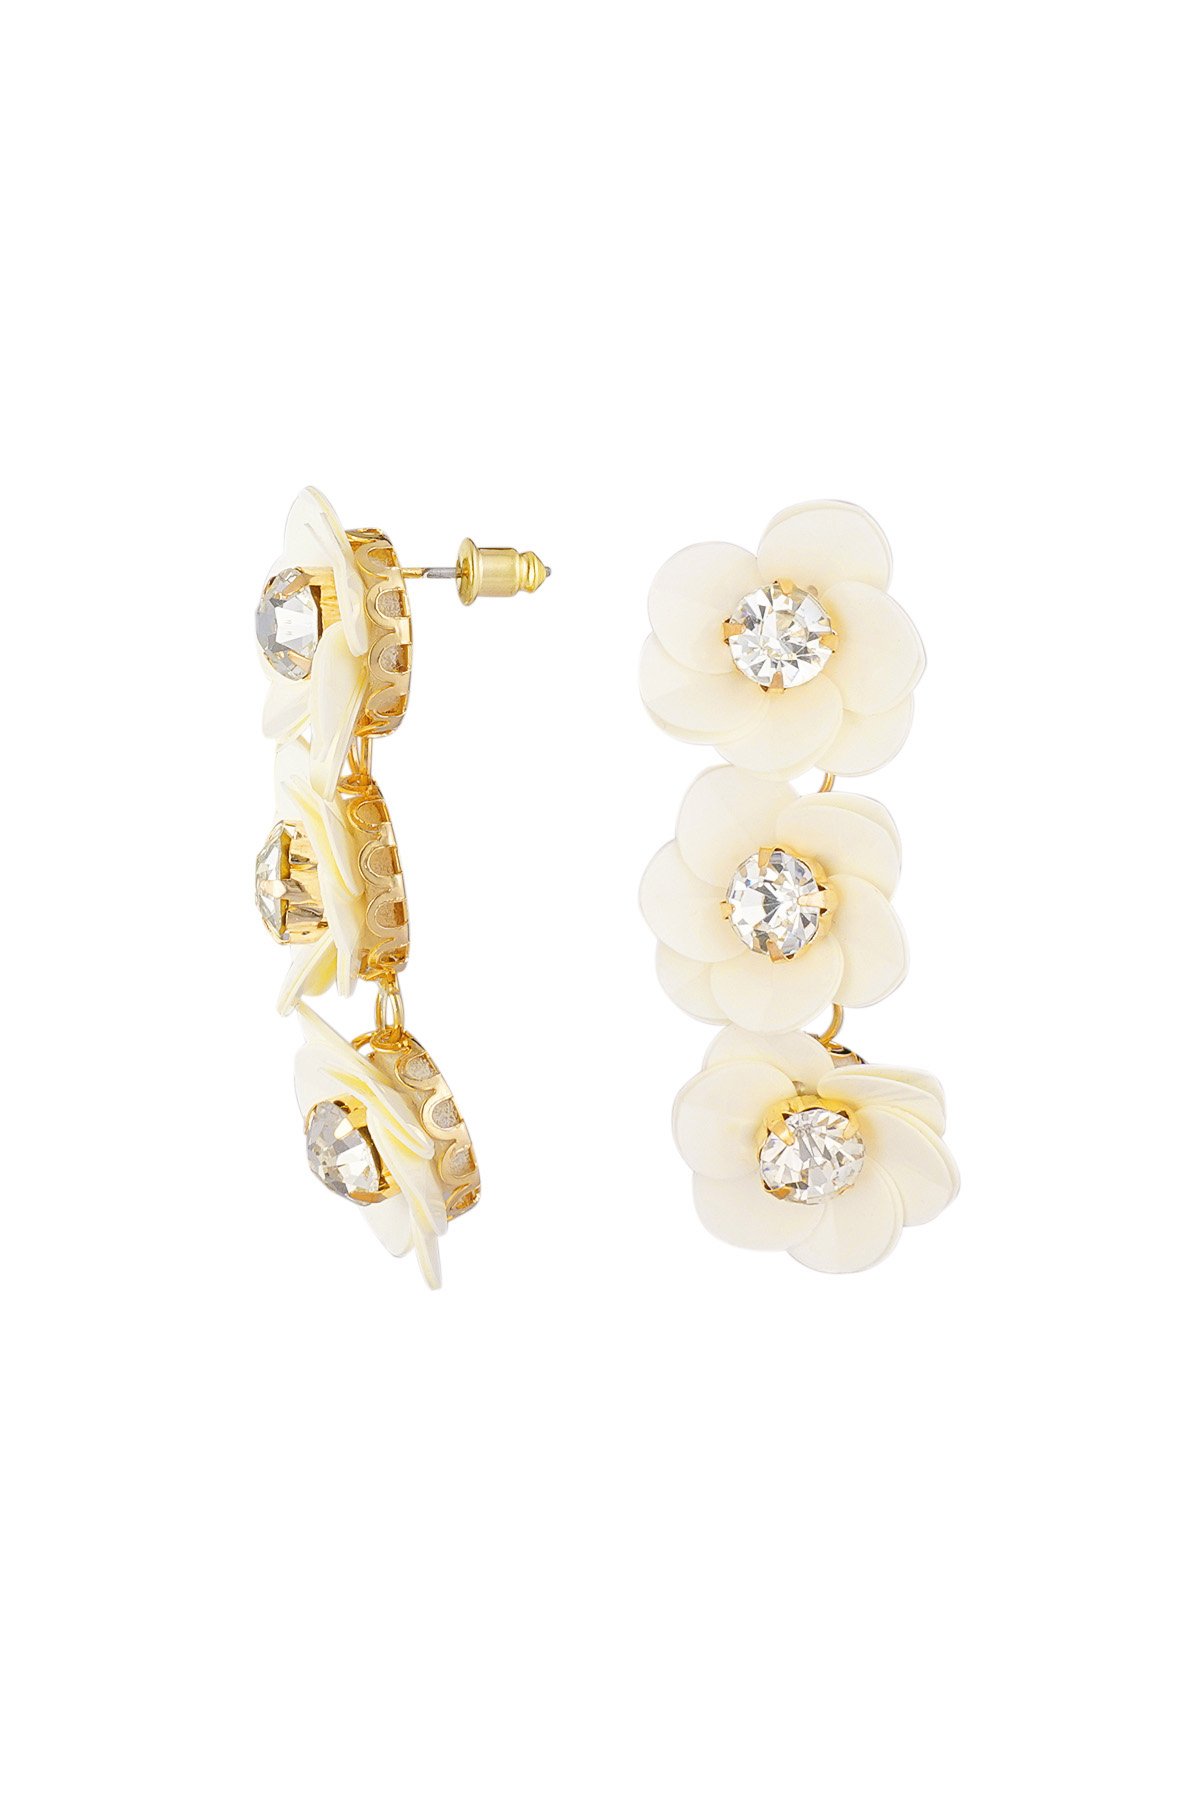 Summery floral trio earrings - white